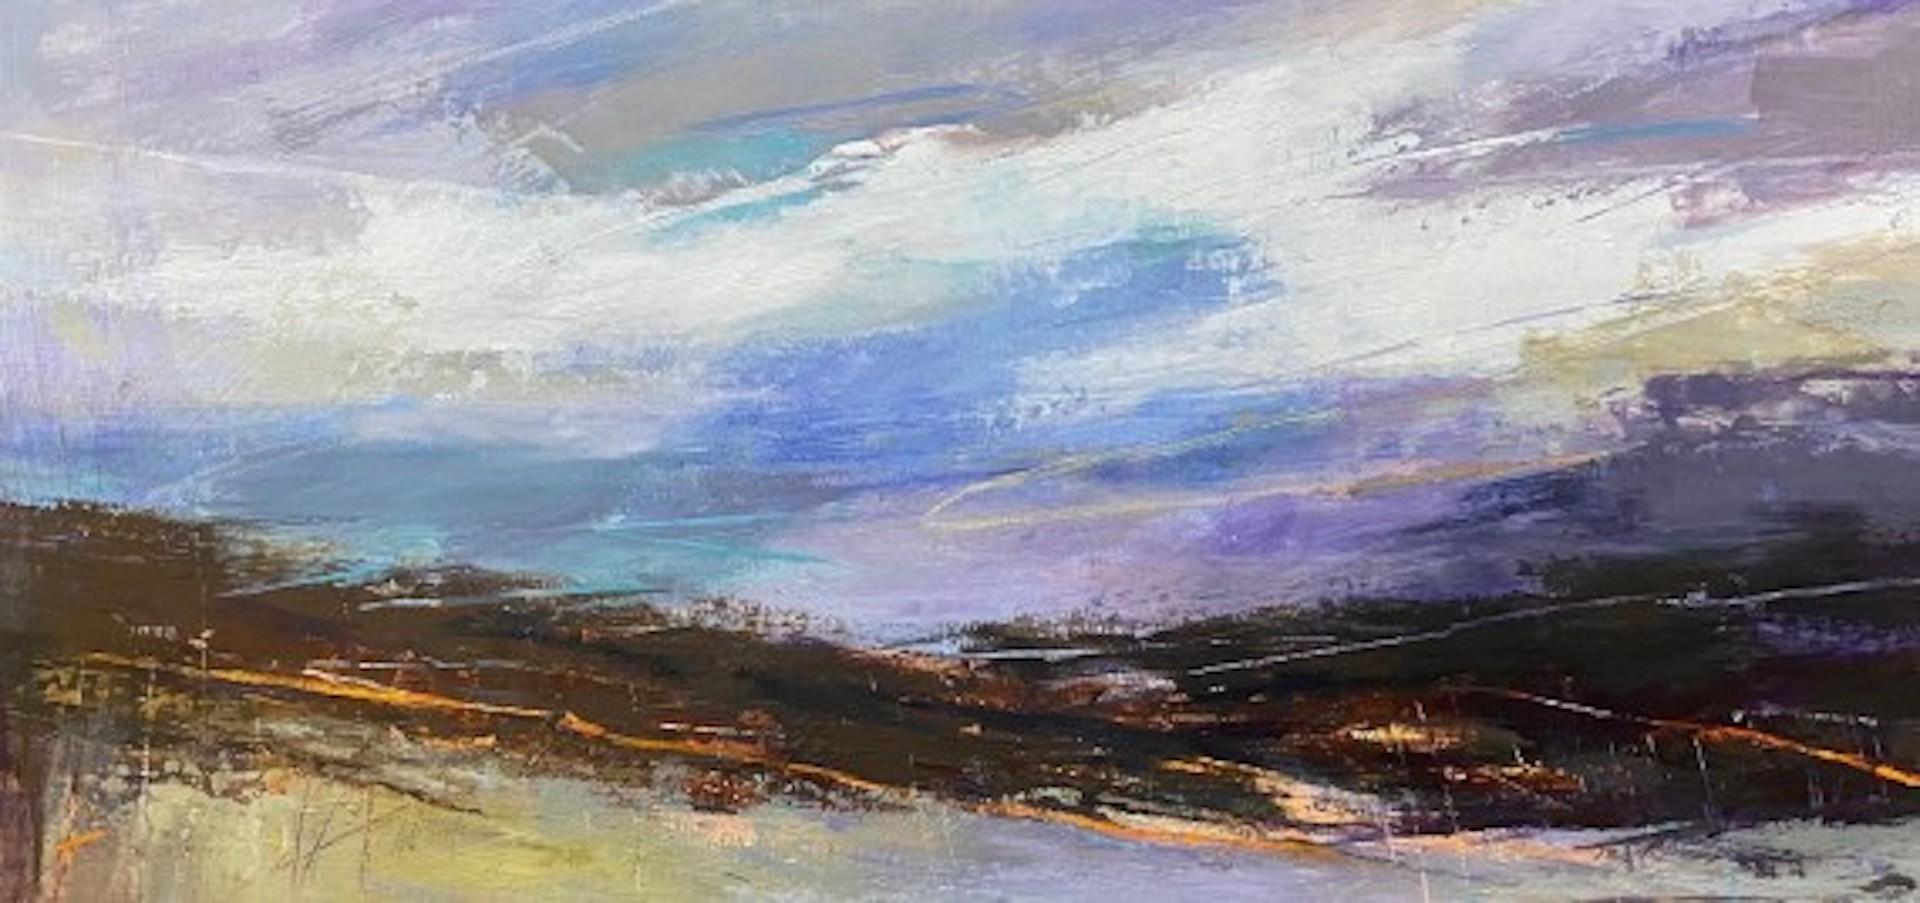 Purple Moorland Panorama by Luisa Holden [2021]
Original
Mixed Media on gessoed cardboard
Image size: H:23 cm x W:47.5 cm
Complete Size of Unframed Work: H:40 cm x W:64.5 cm x D:0.5cm
Sold Unframed
Please note that insitu images are purely an